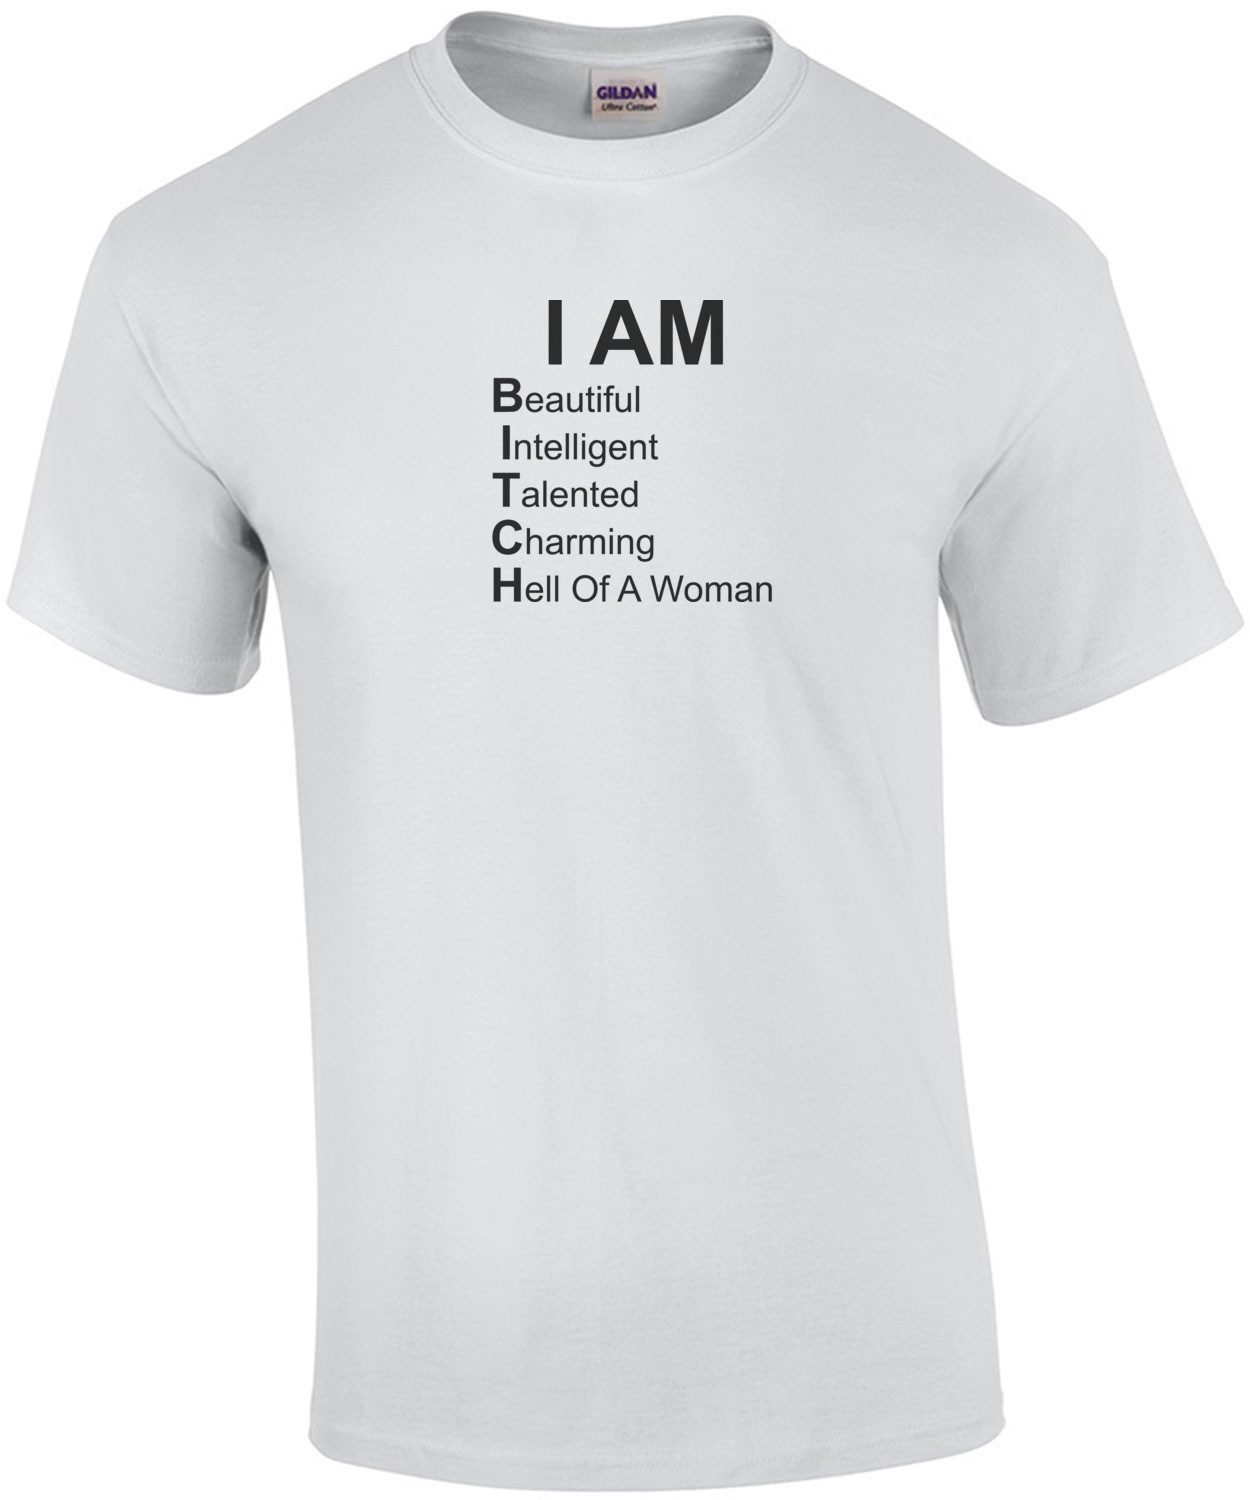 I AM BITCH - Beautiful Intelligent Tallented Charming Hell Of A Woman. Funny T-Shirt